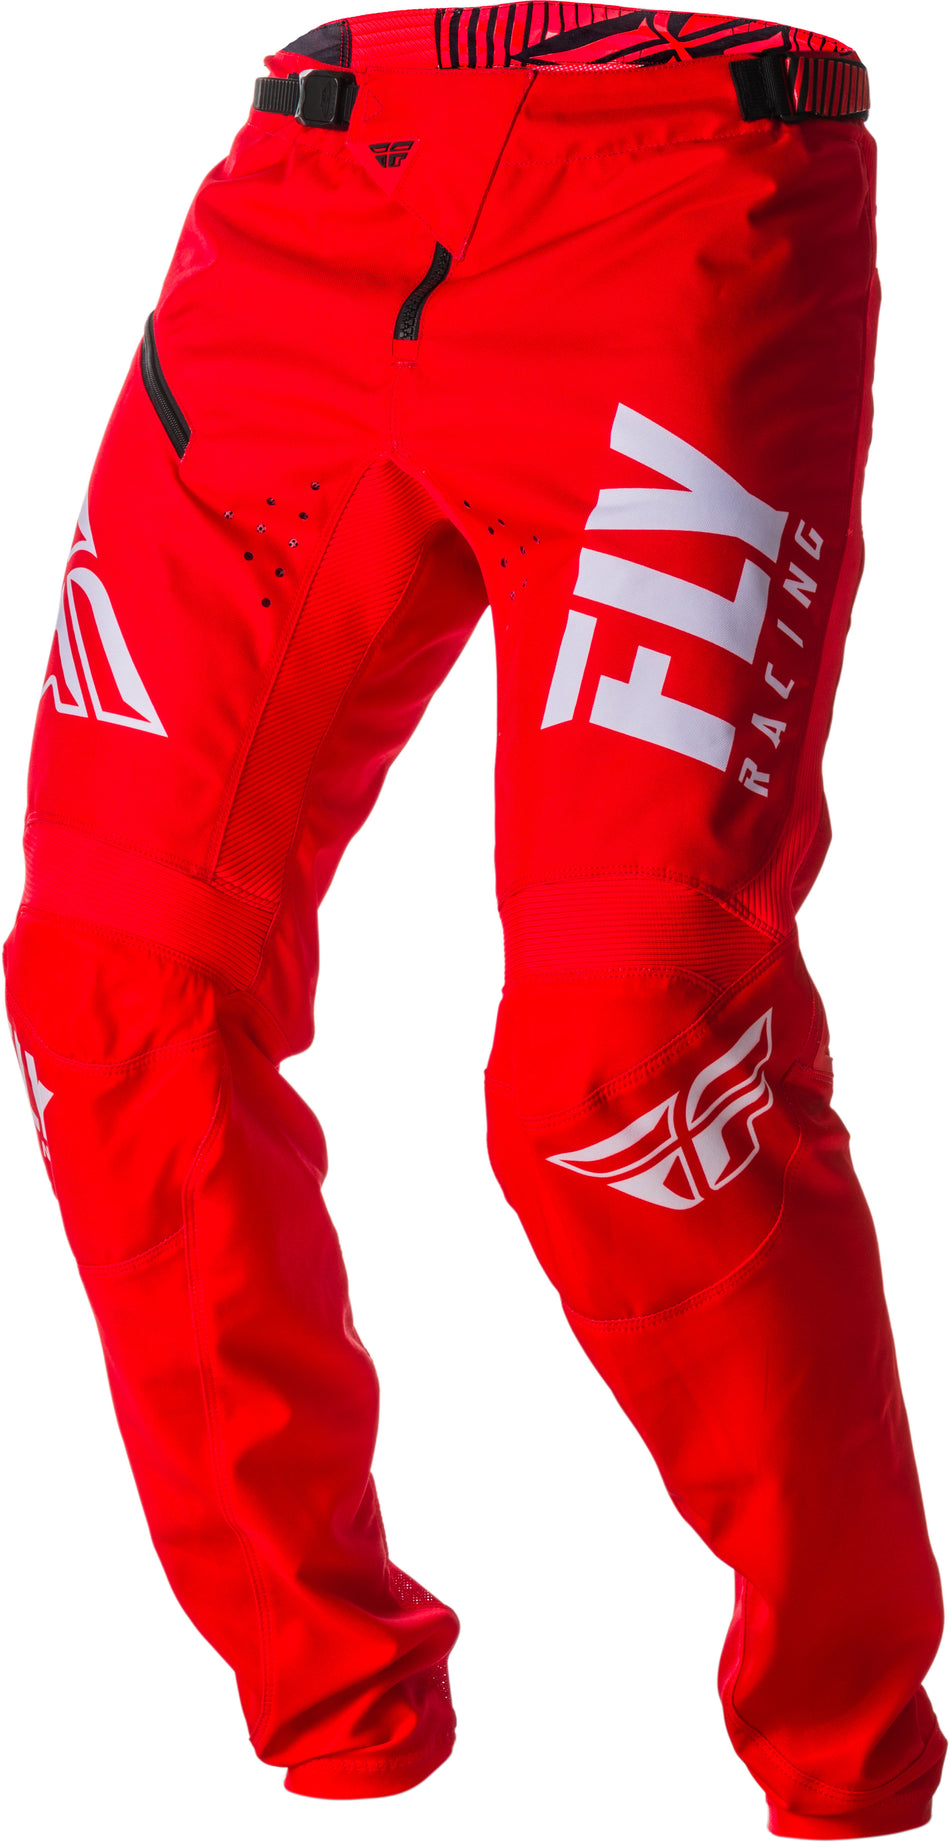 FLY RACING Kinetic Shield Bicycle Pants Red/White Sz 24 372-02224